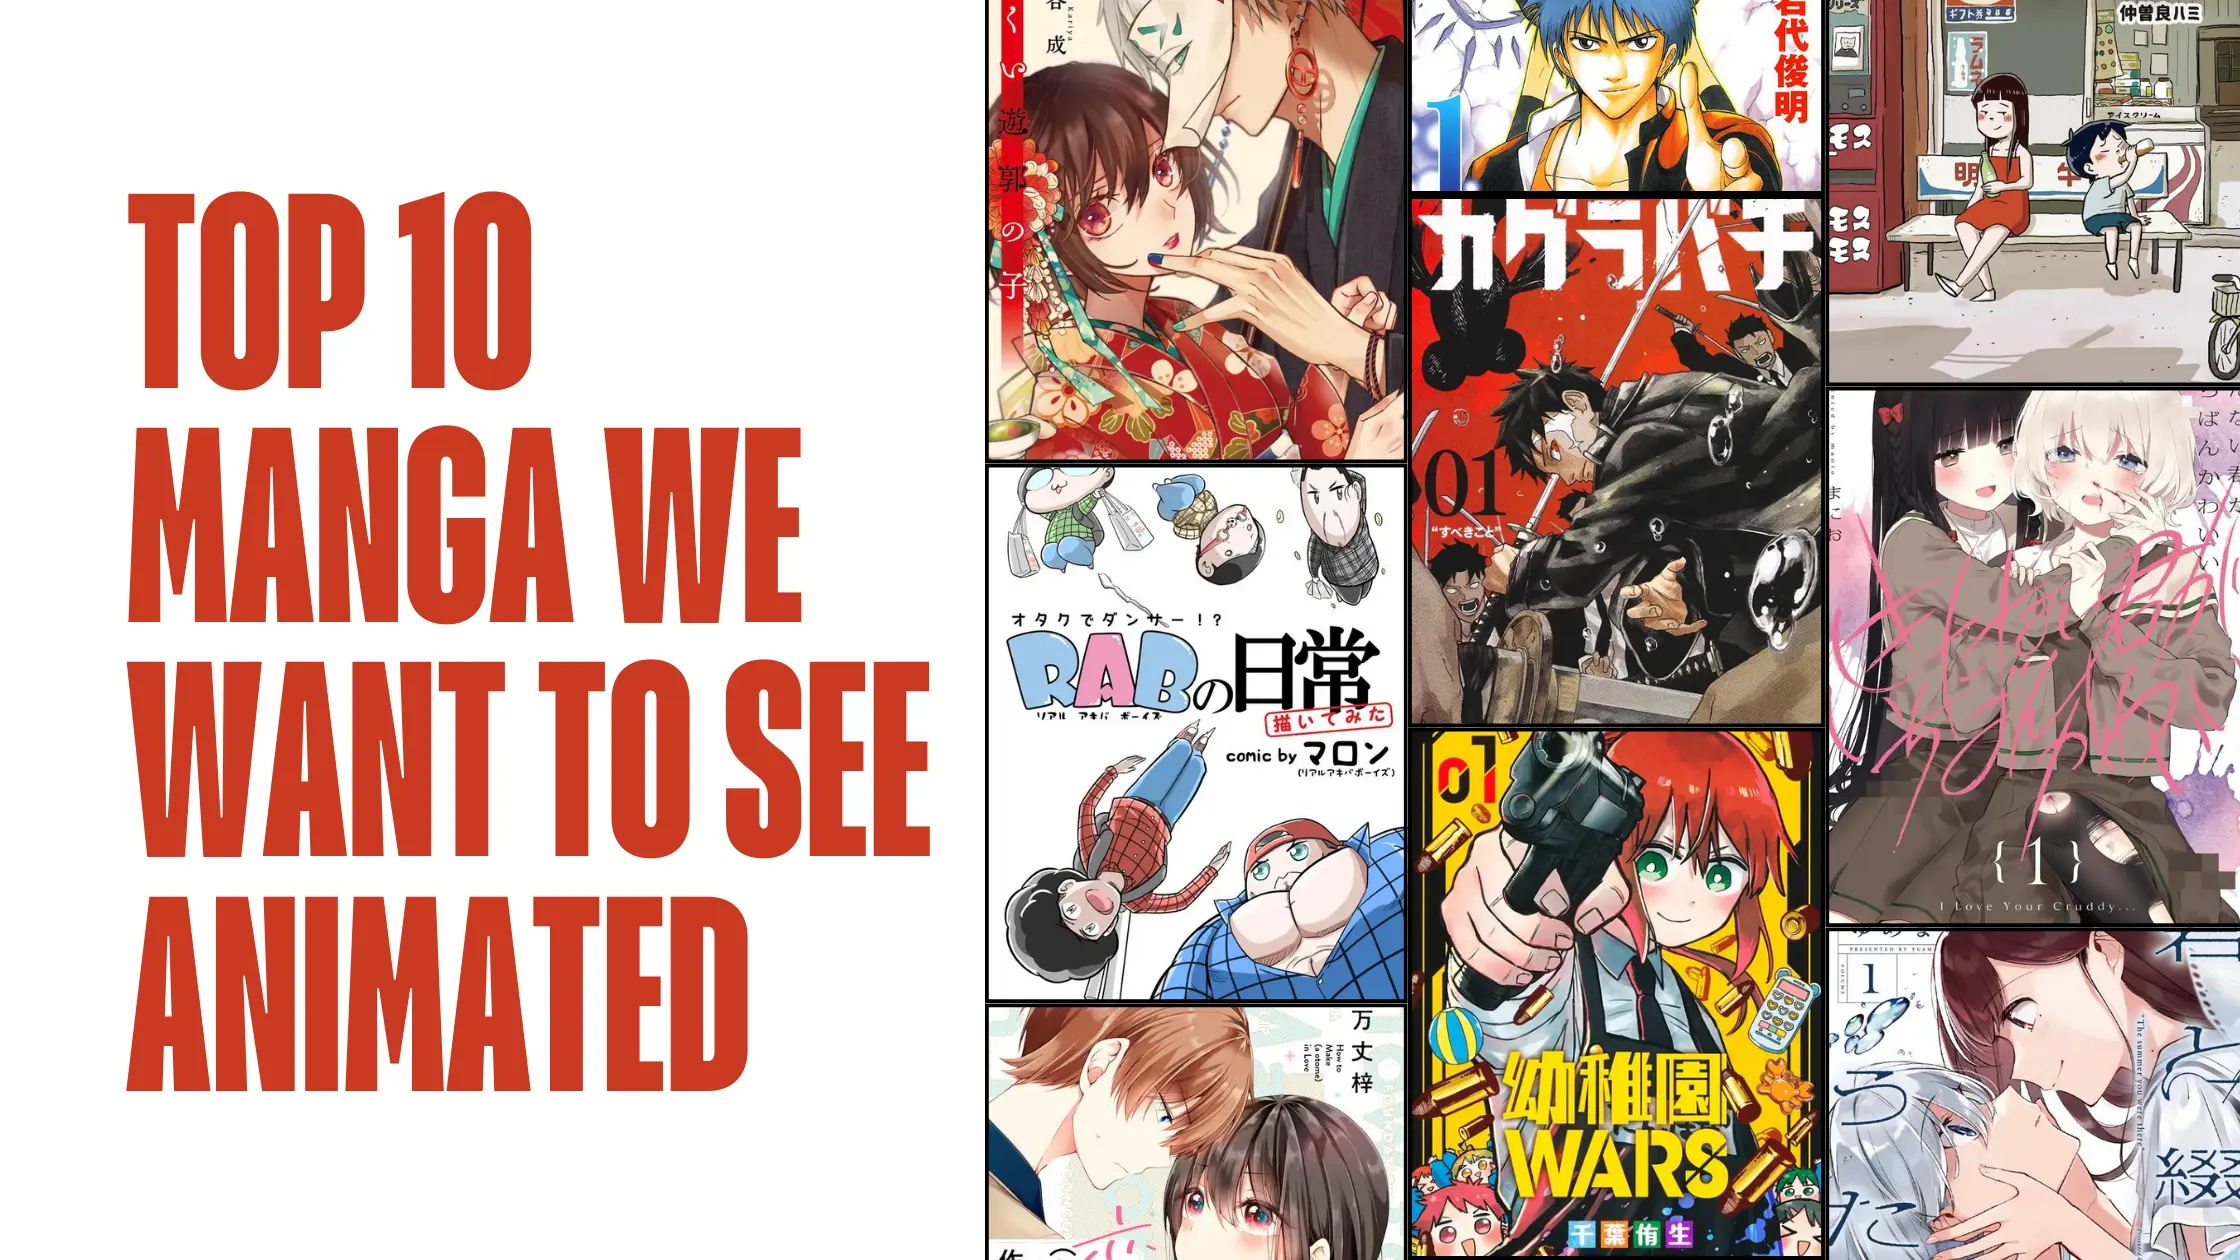 Top 10 Manga We Want To See Animated